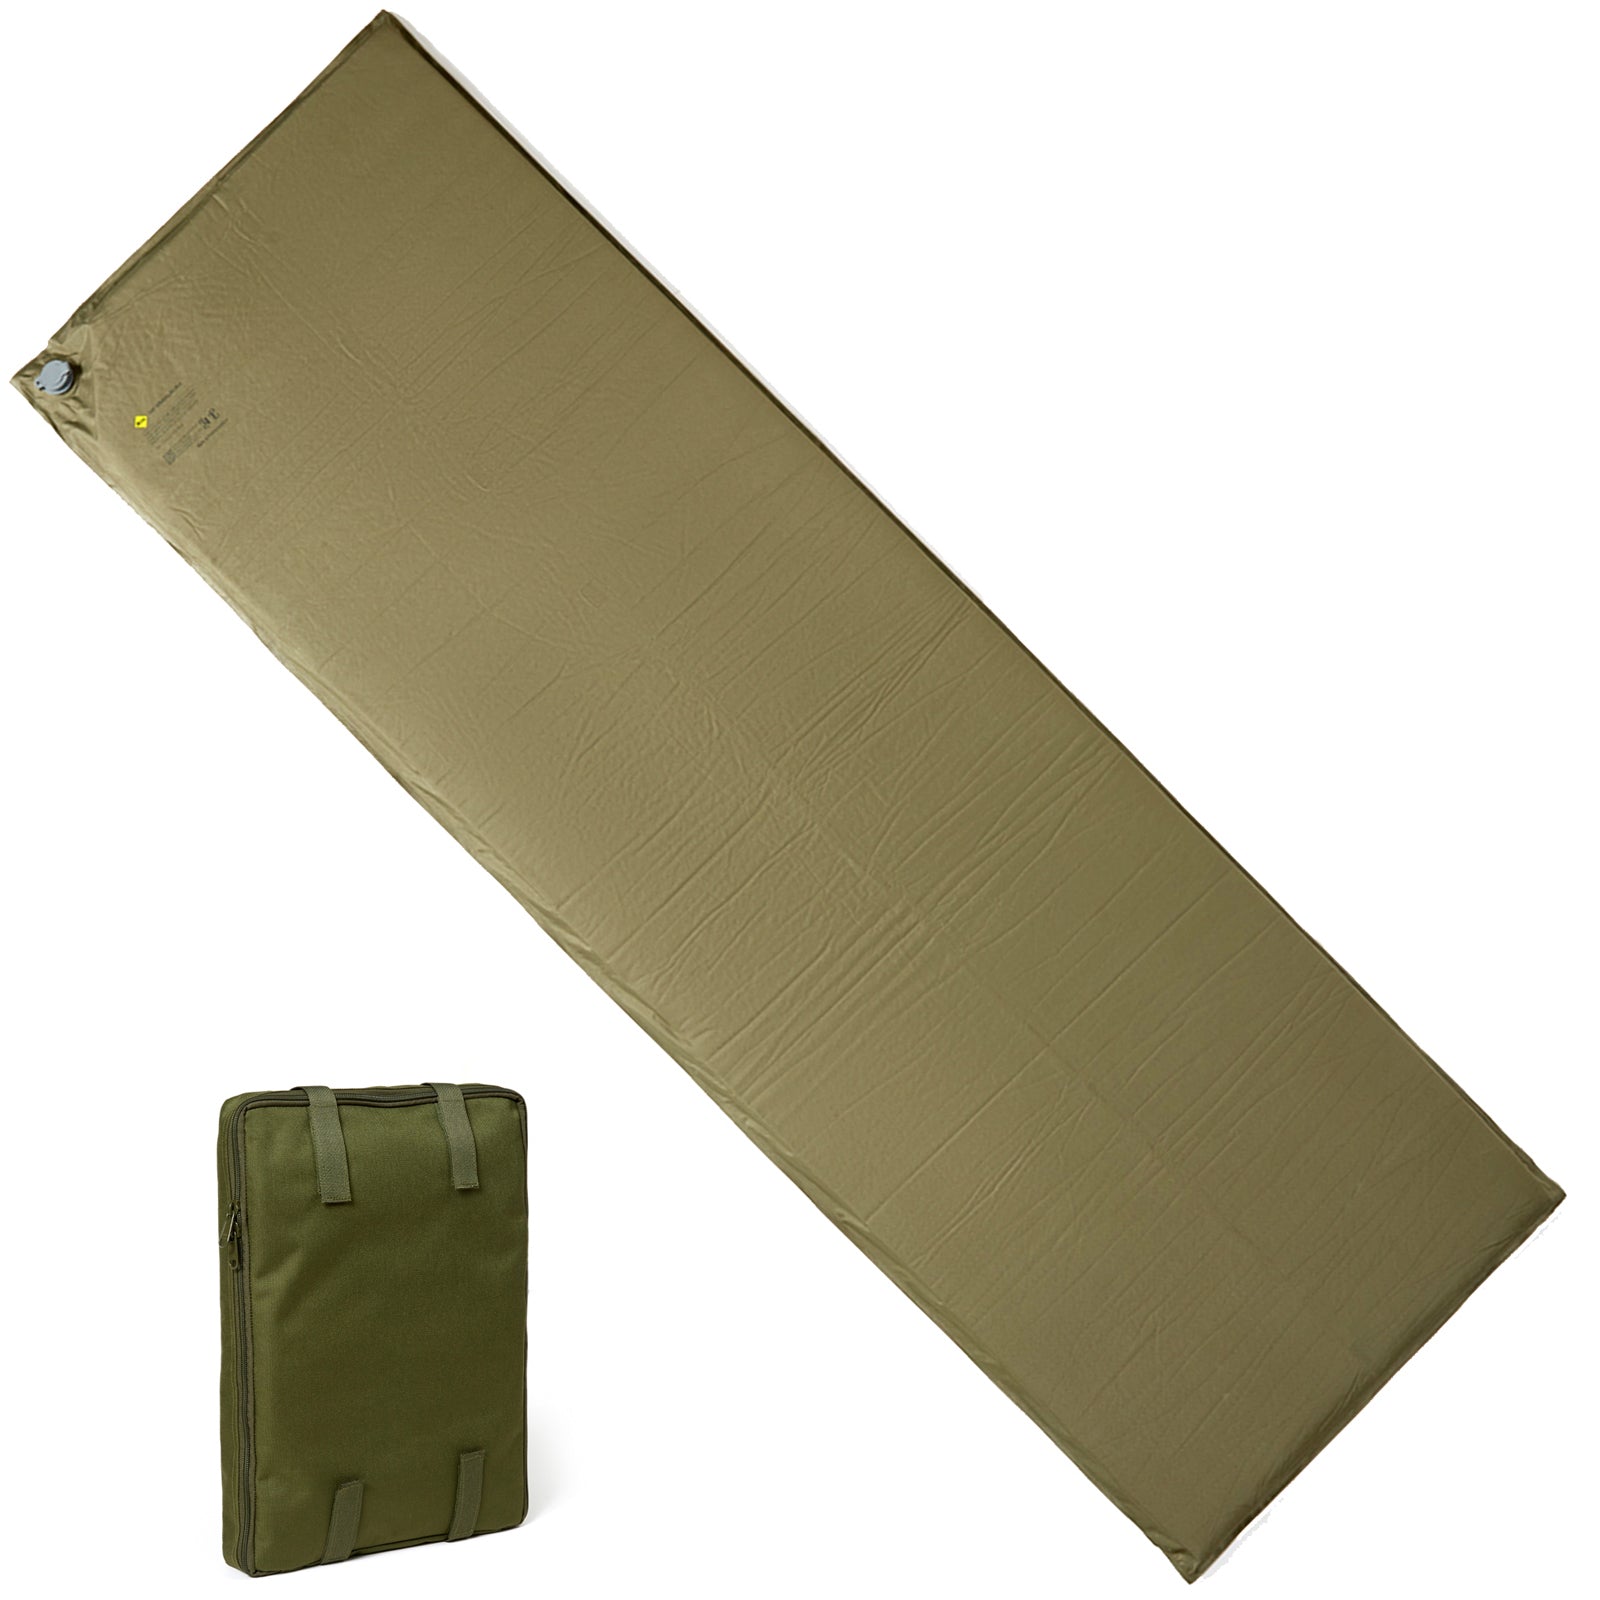 Akmax Military Alice Waterproof Thick Outdoor Camping Sleeping Mat - AKmax Military